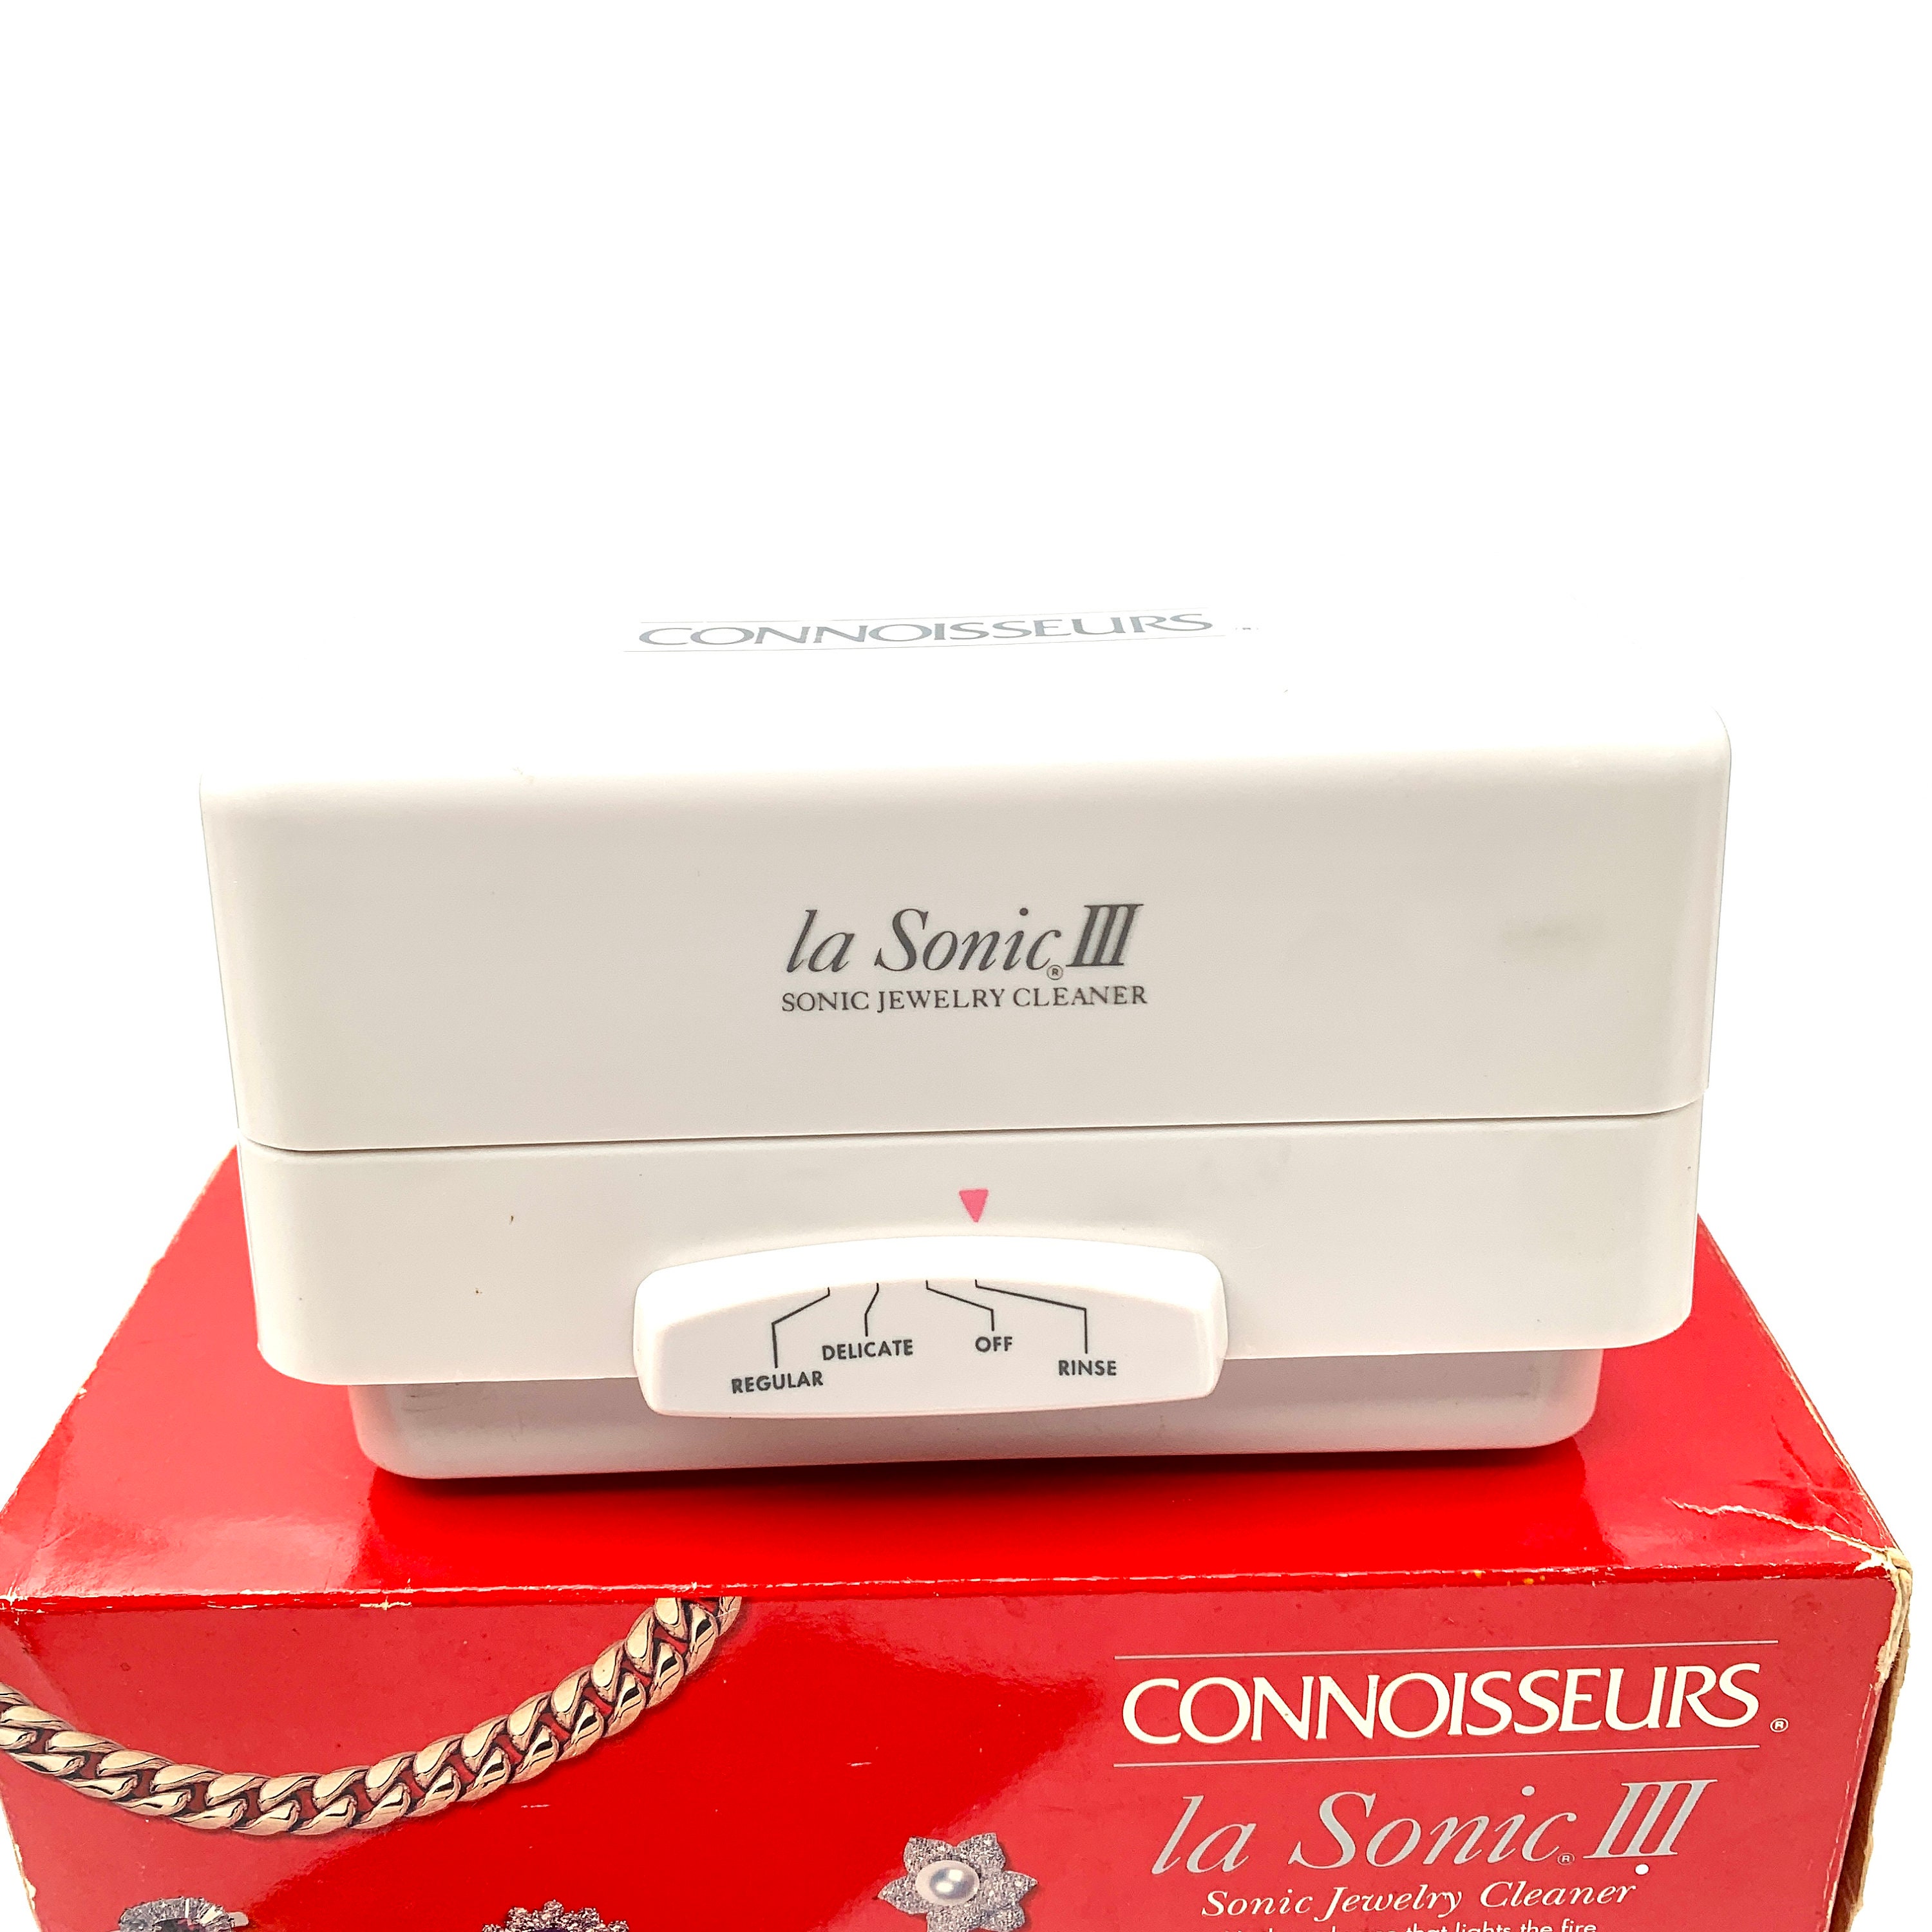 Connoisseurs La Sonic Safewave Jewelry Cleaner Machine, Professional  Jewelry Cleaning at Home, Safe on Jewelry